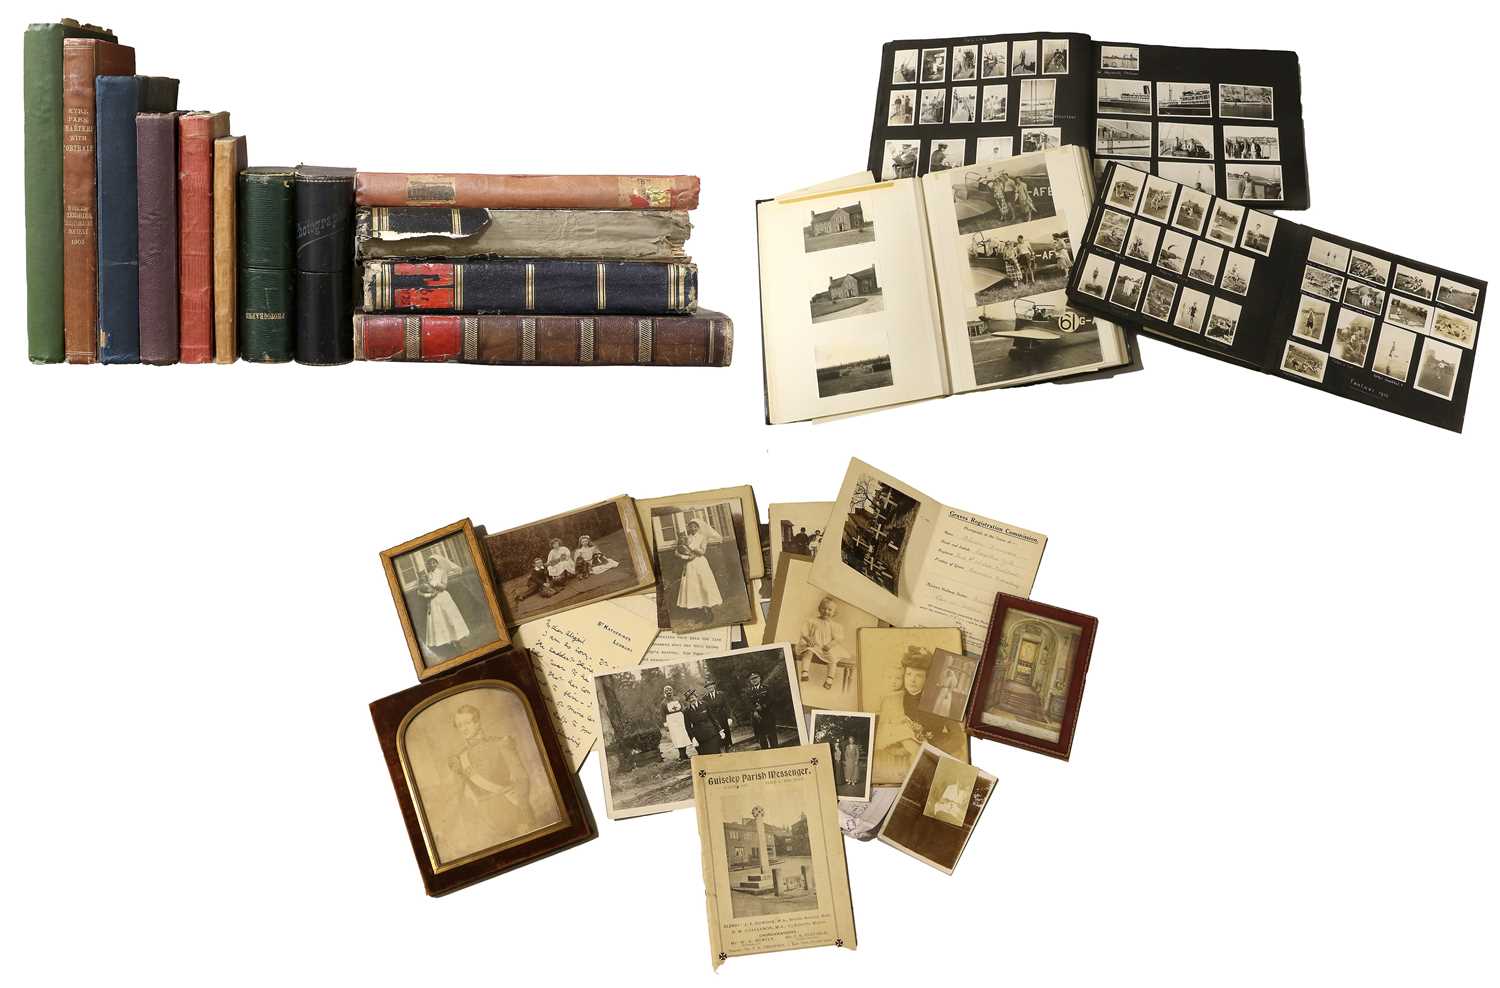 Ephemera. A large collection of ephemera relating to the Childe-Freeman and Harman Families. A